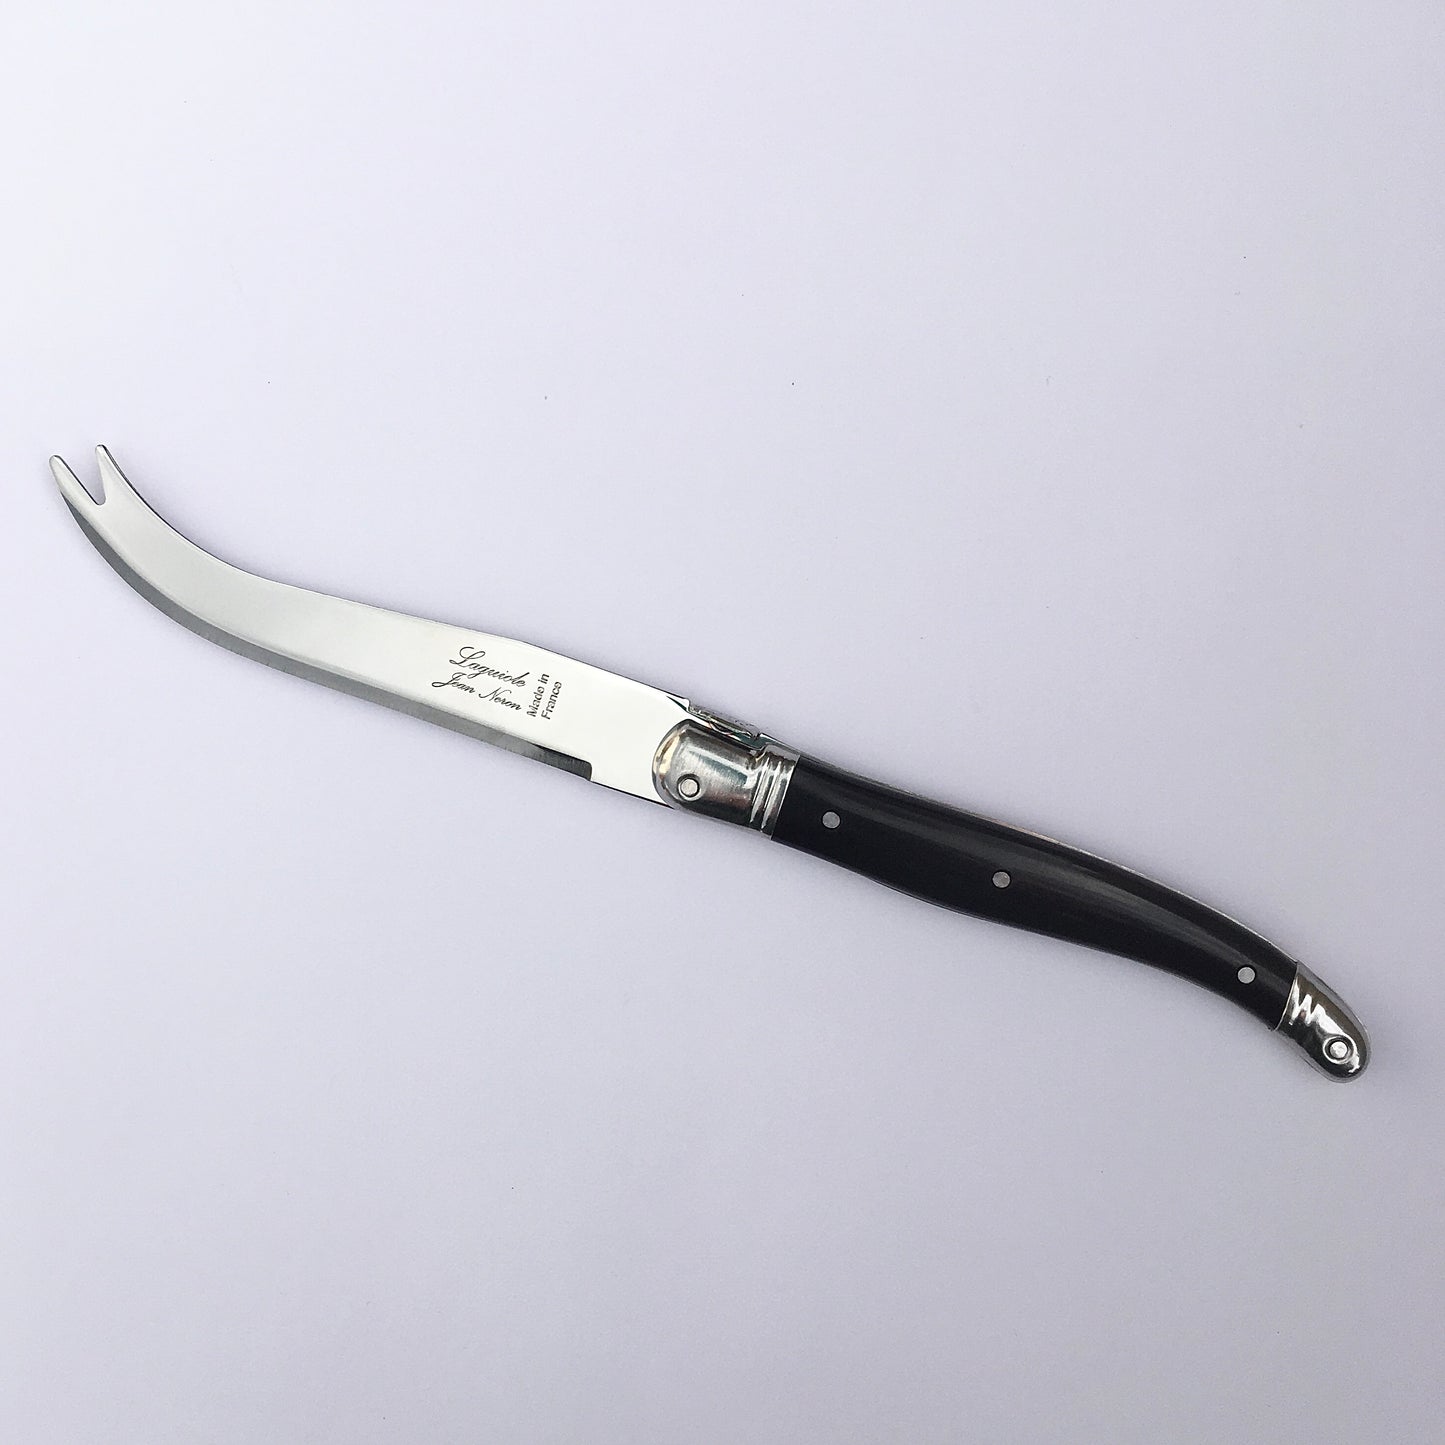 Long Cheese Knife - Ivory or Black